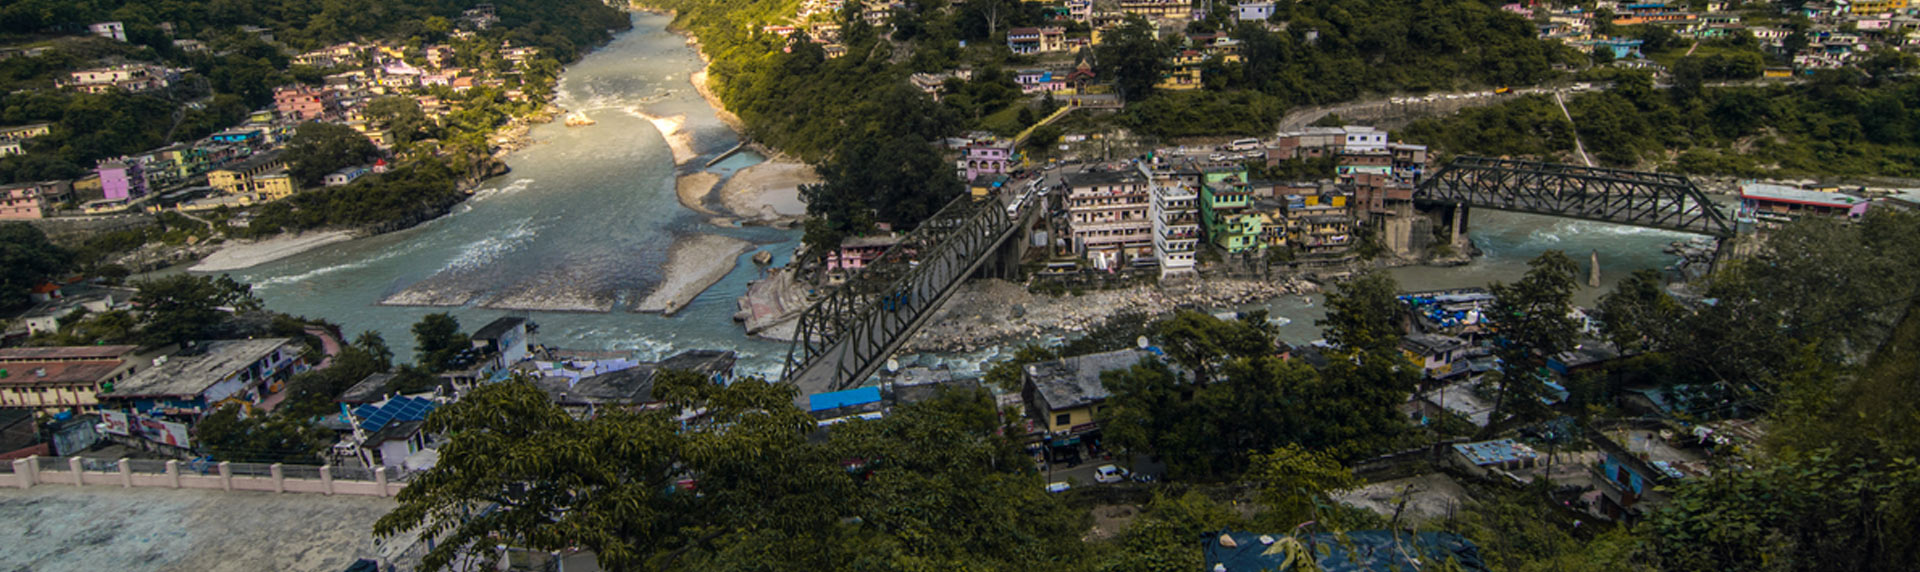 Karnaprayag in Chamoli district is a part of Panch Prayag which is situated at the confluence of Alaknanda and Pindar river.